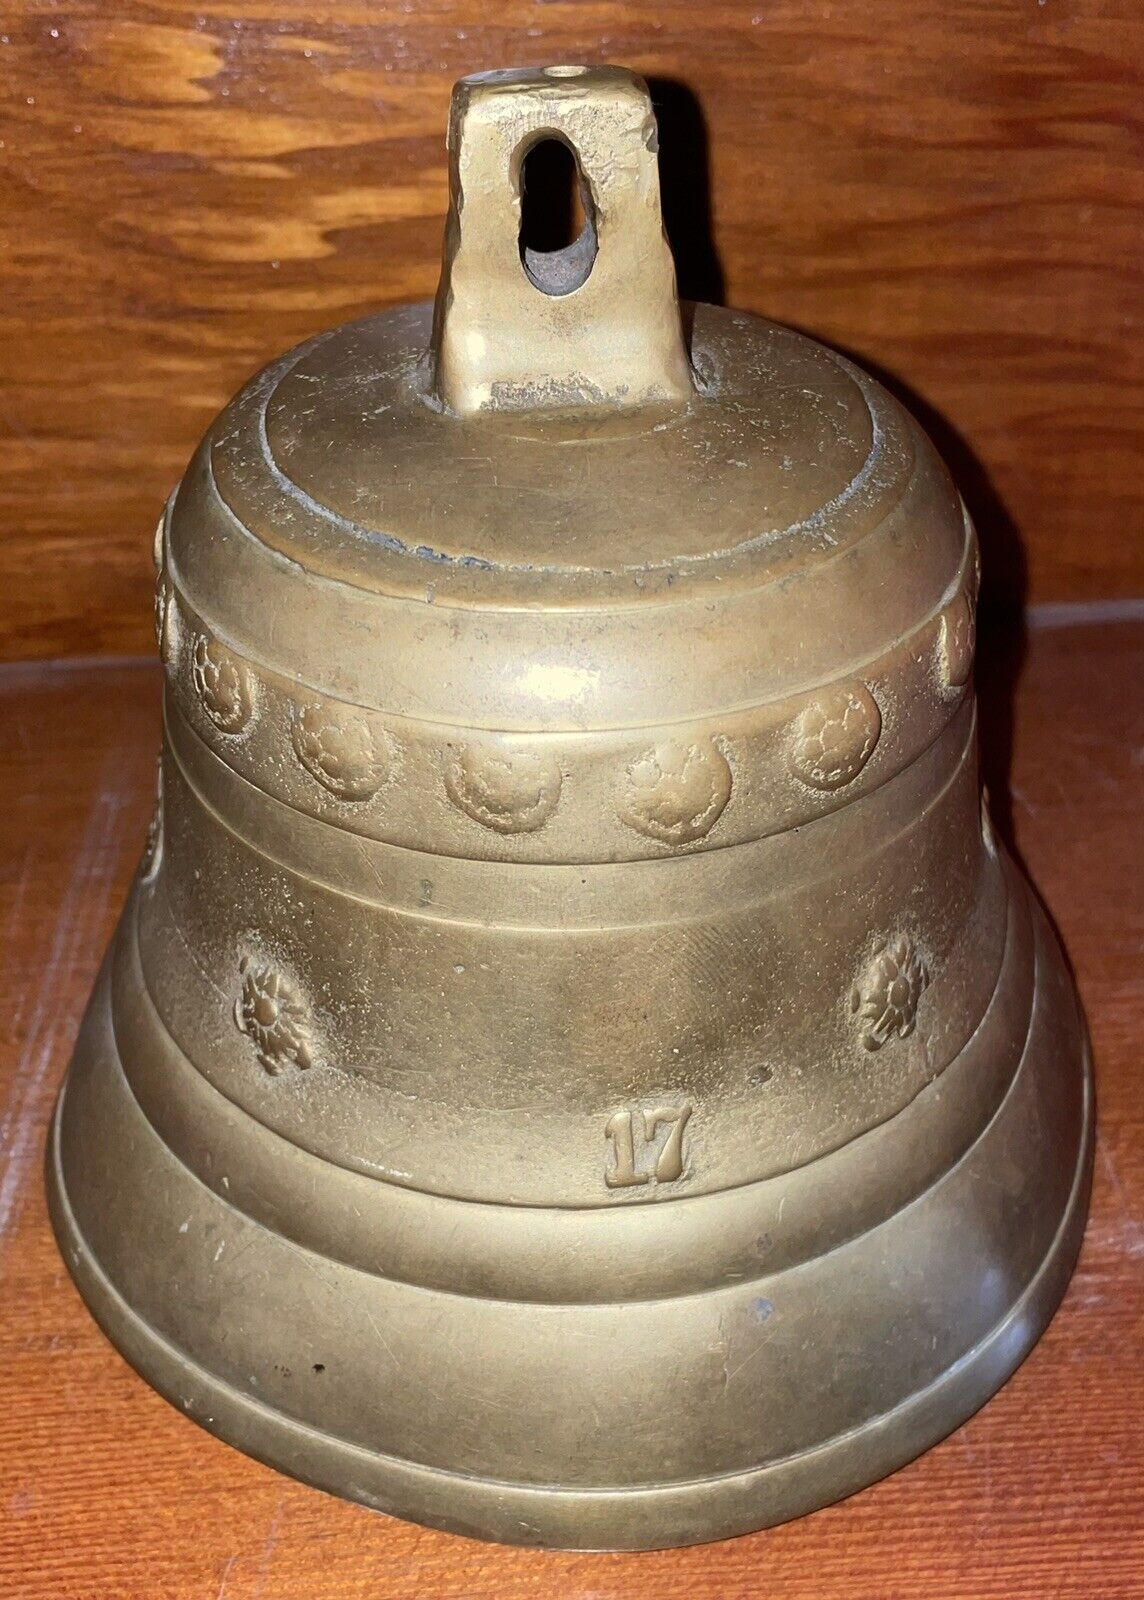 RARE ANTIQUE MISSION BELL - Authentic -  Christogram IHS - Worn out Relic ￼